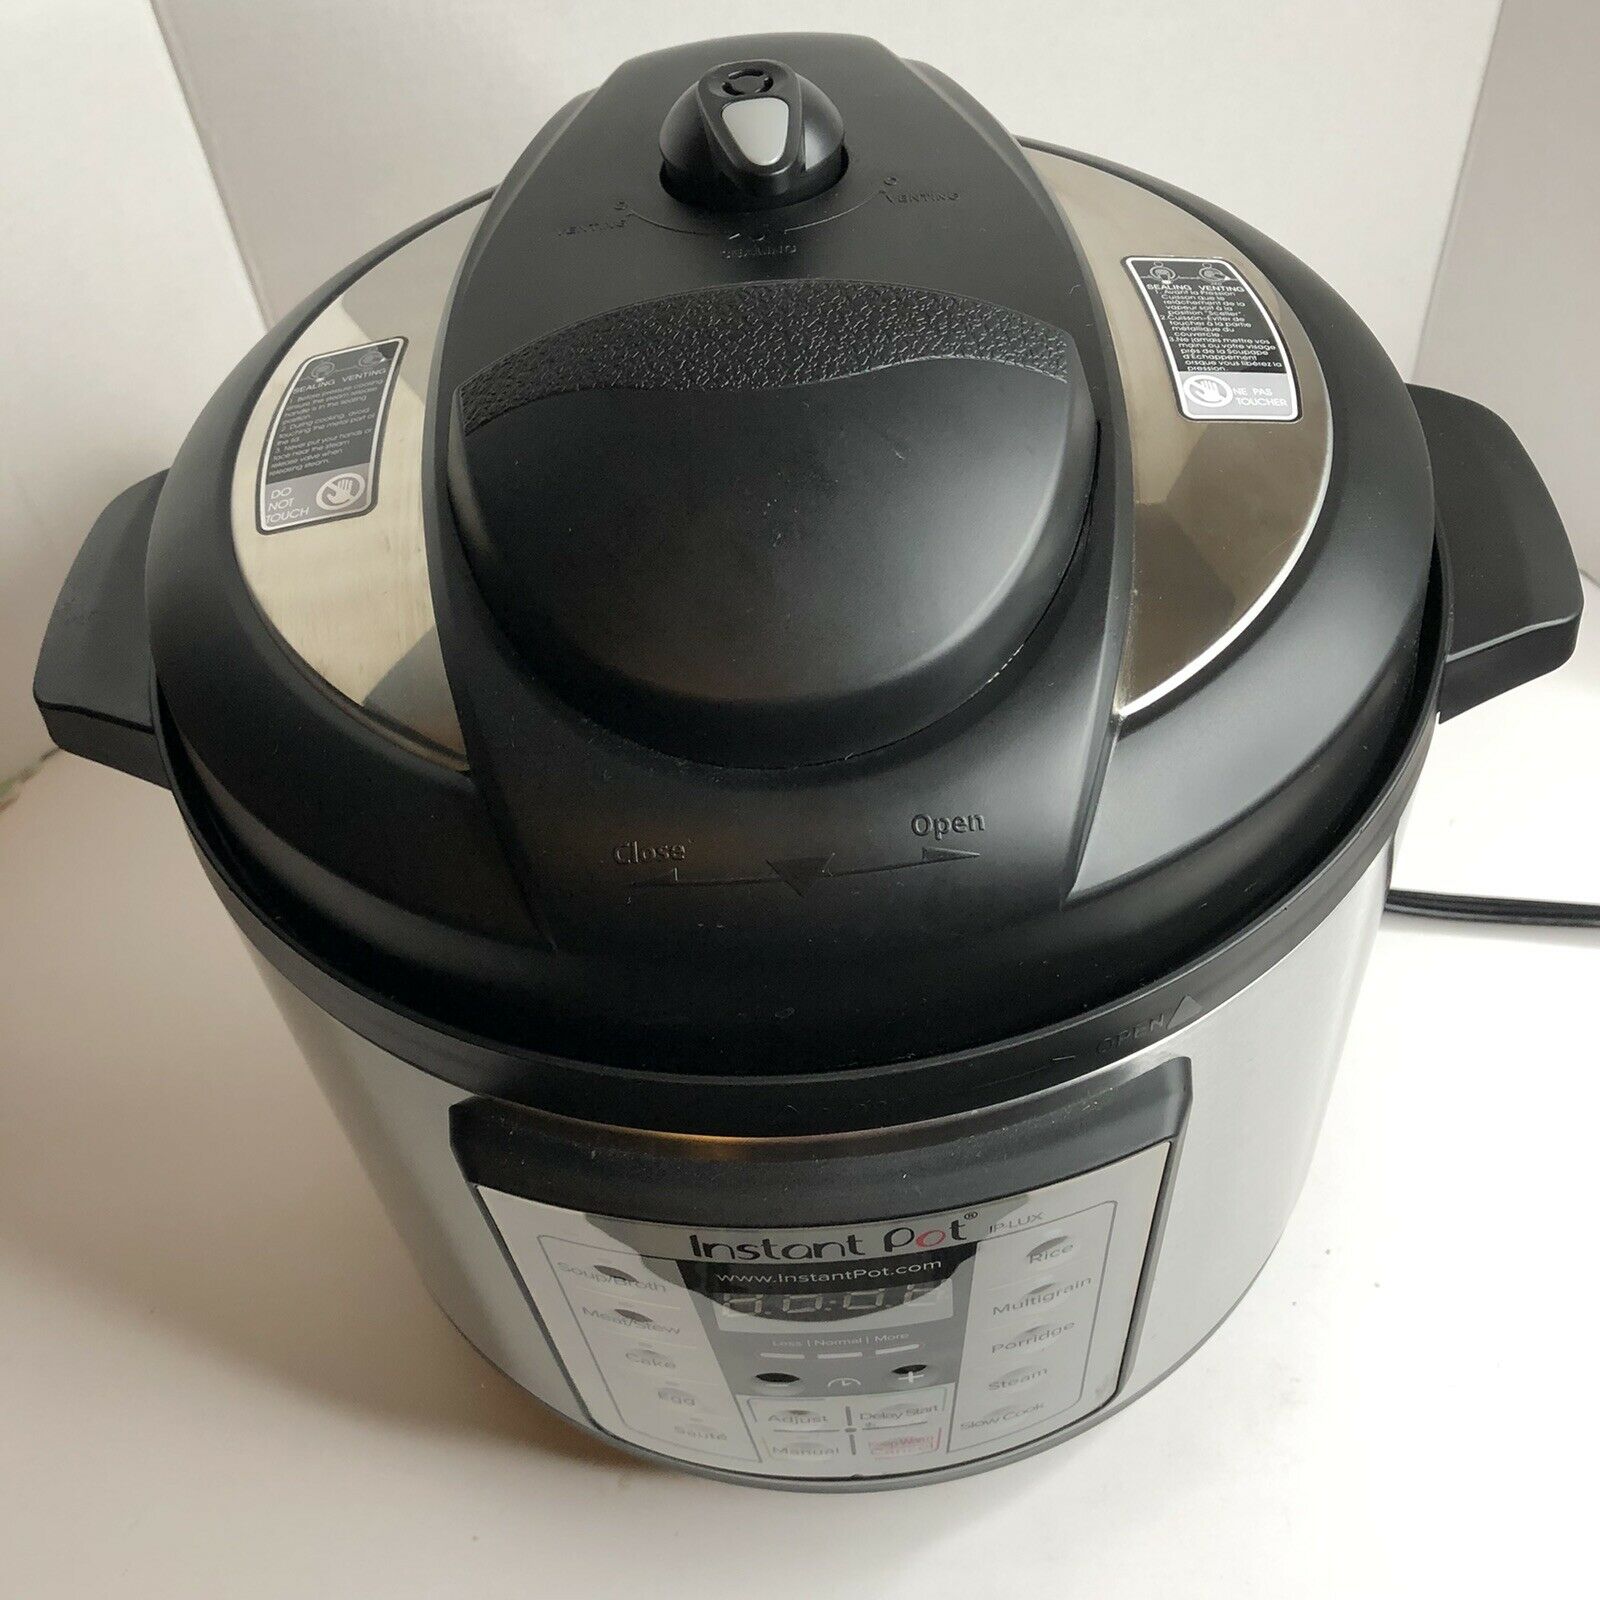 Instant Pot 8 Qt 7-in-1 Multi- Use Programmable Pressure Cooker, Rice IP-LUX80